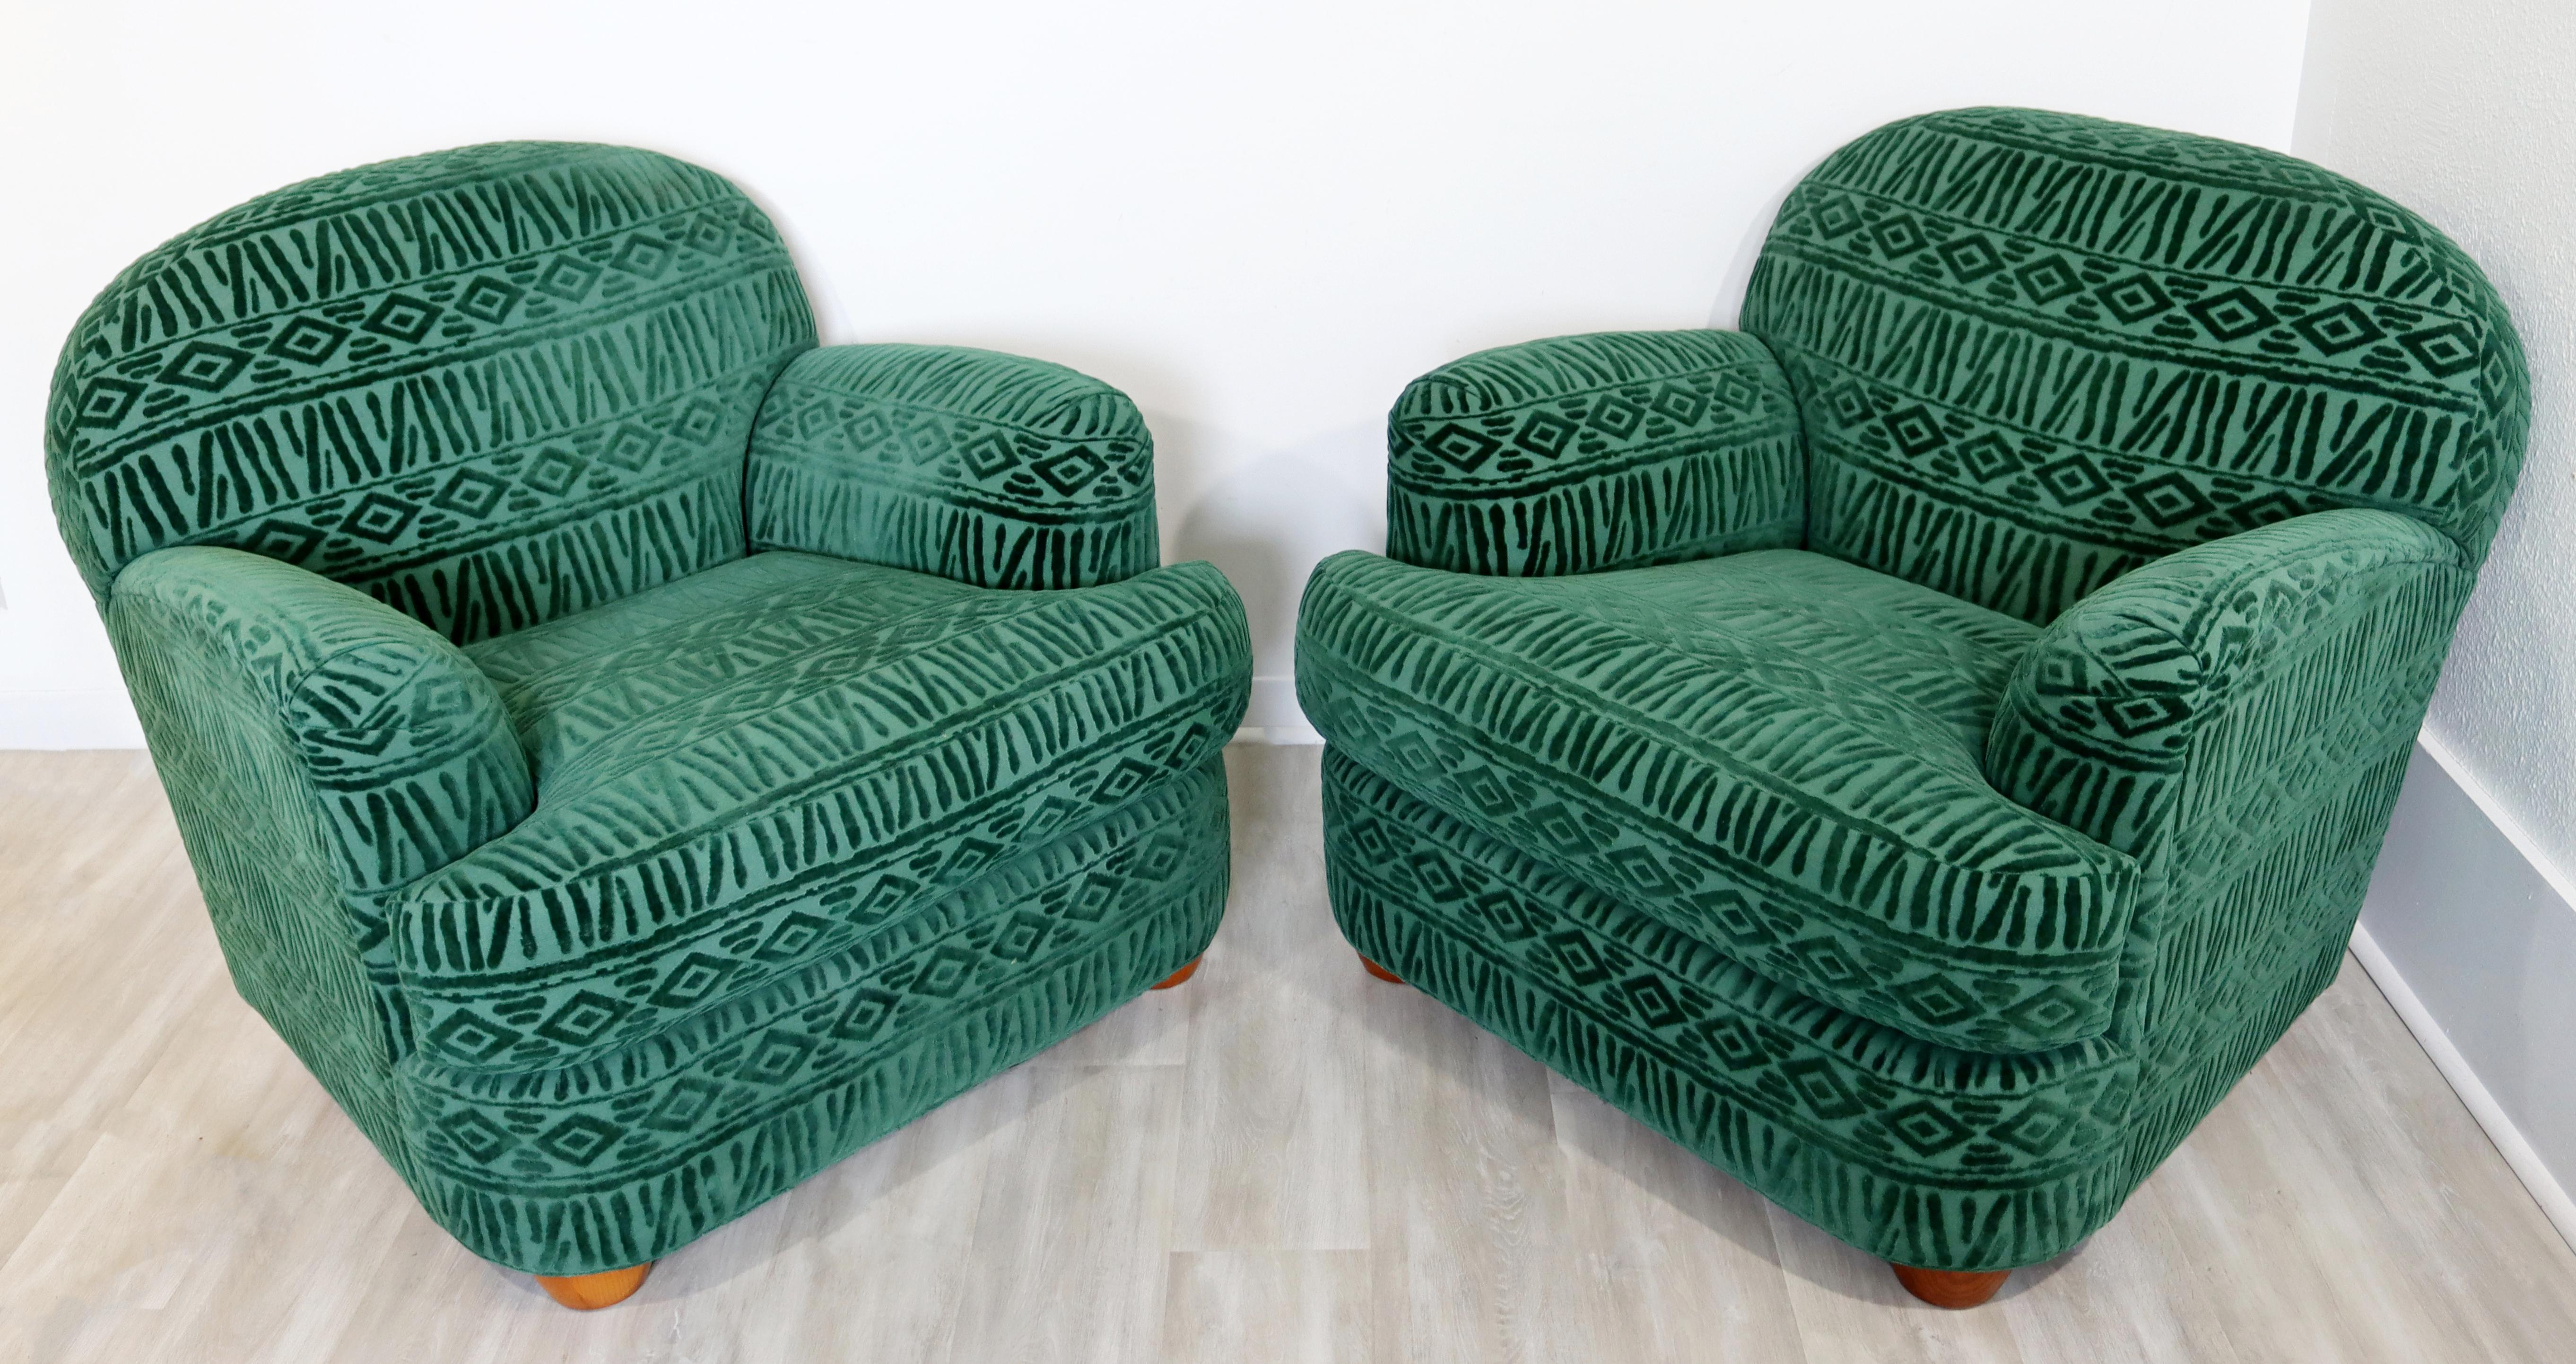 For your consideration is a plush pair of club or lounge armchairs, by Pearson, circa the 1980s, in the Art Deco style. In excellent vintage condition. The dimensions are 39